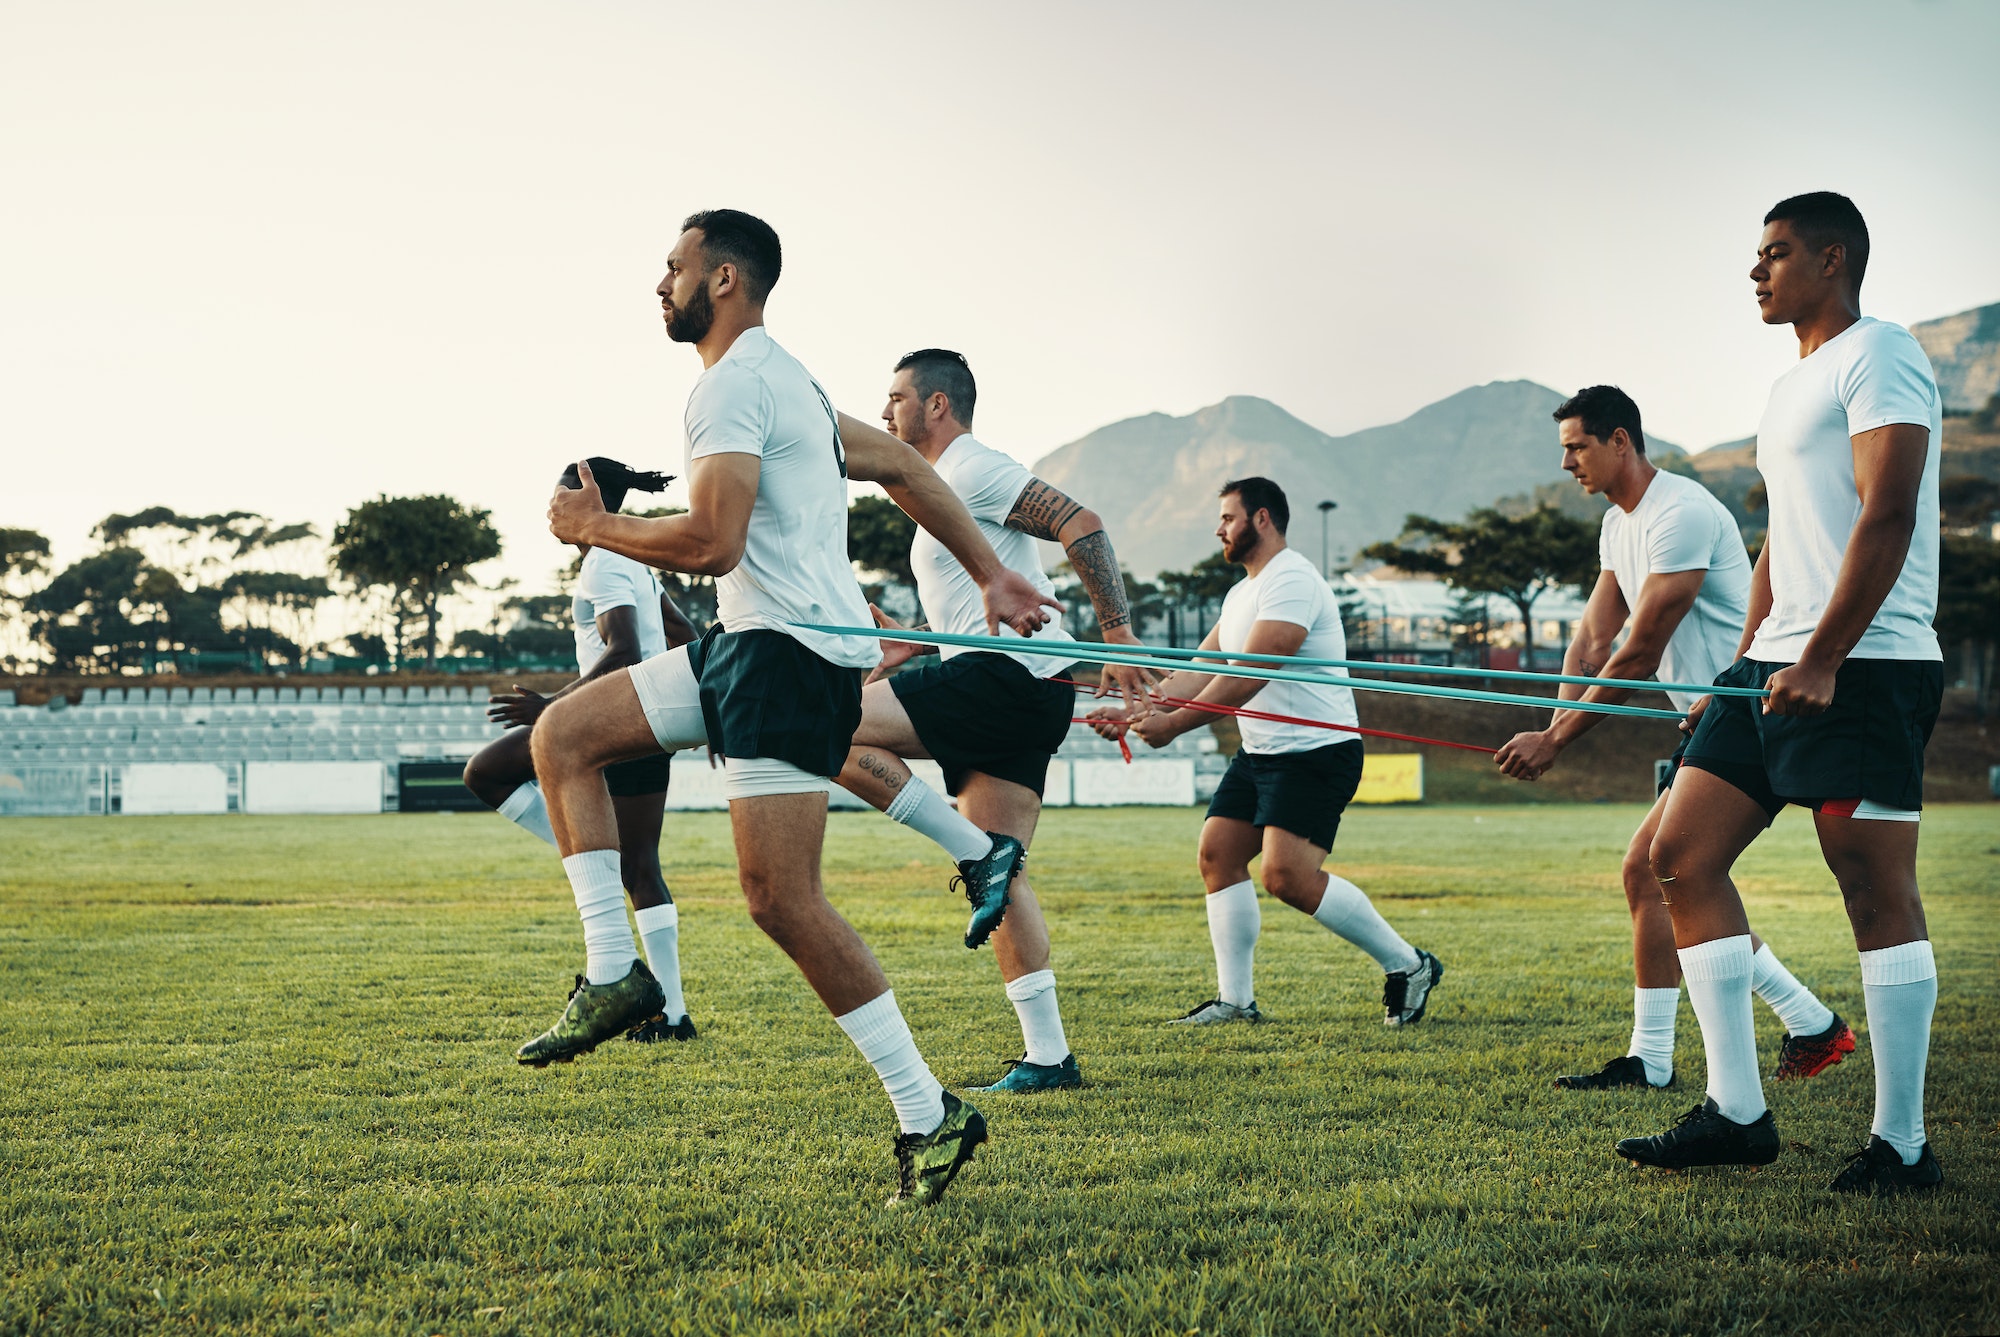 Full length shot of a group of young rugby players training with bands on the field during the day